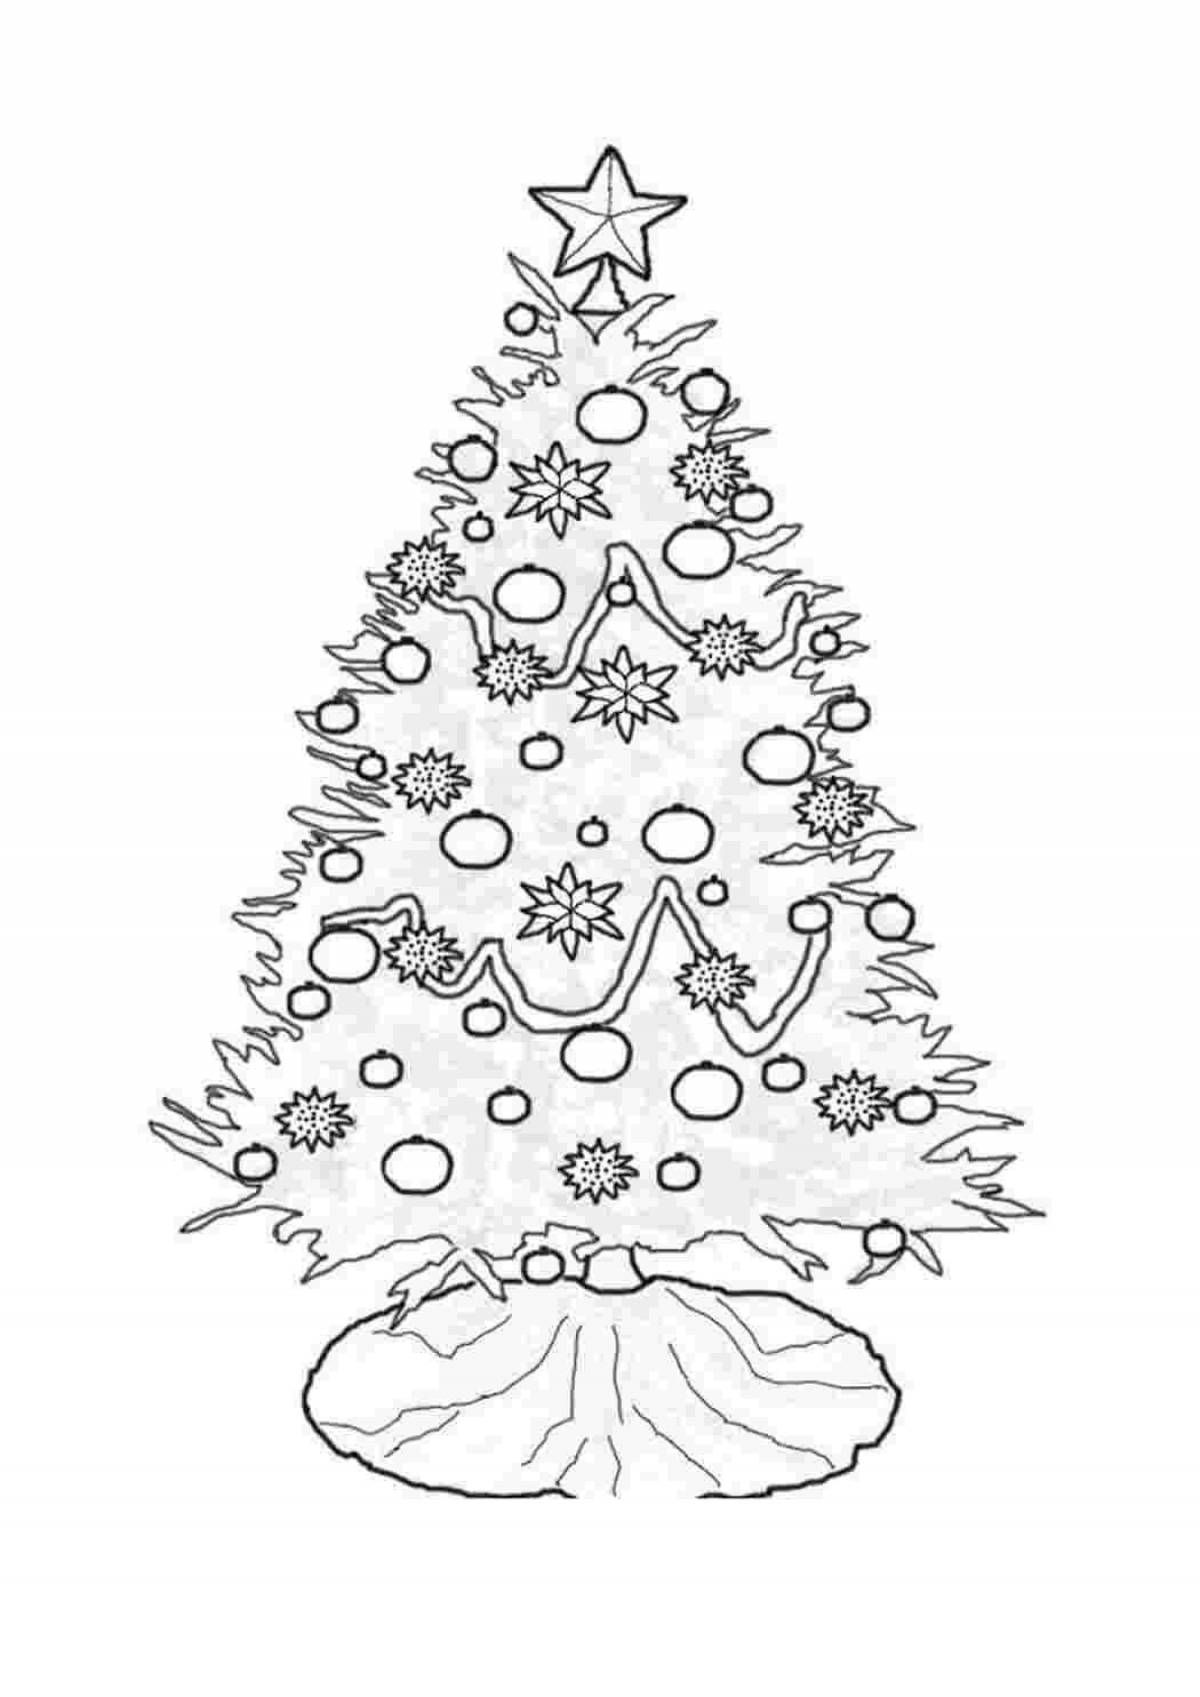 Coloring page gorgeous winter tree